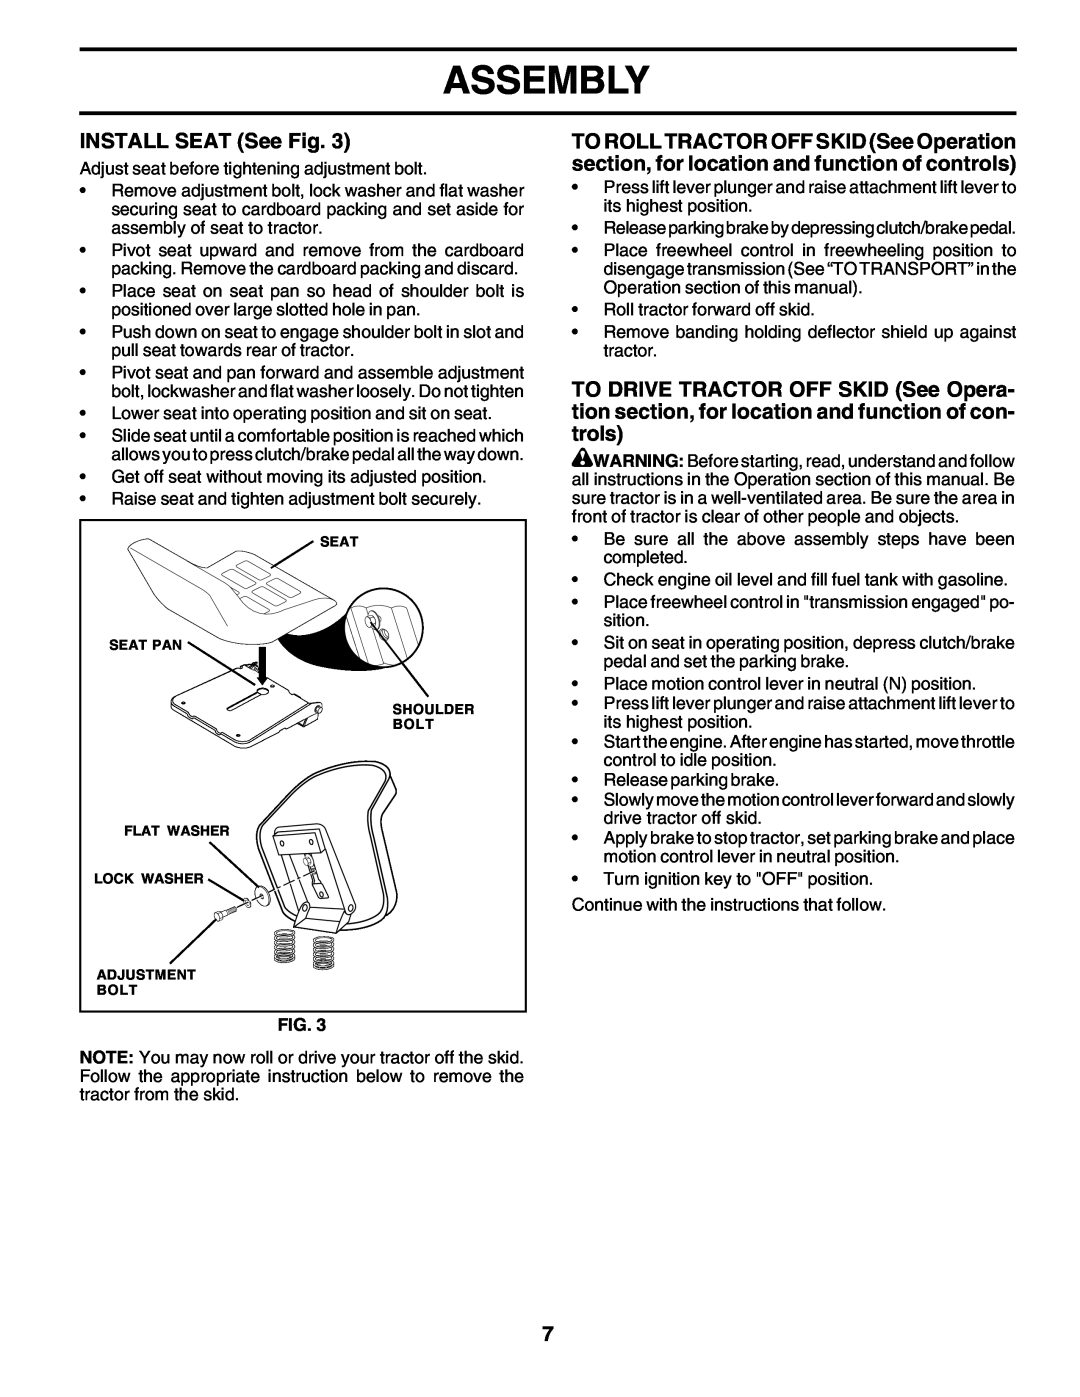 Weed Eater 178704 manual Assembly, INSTALL SEAT See Fig 